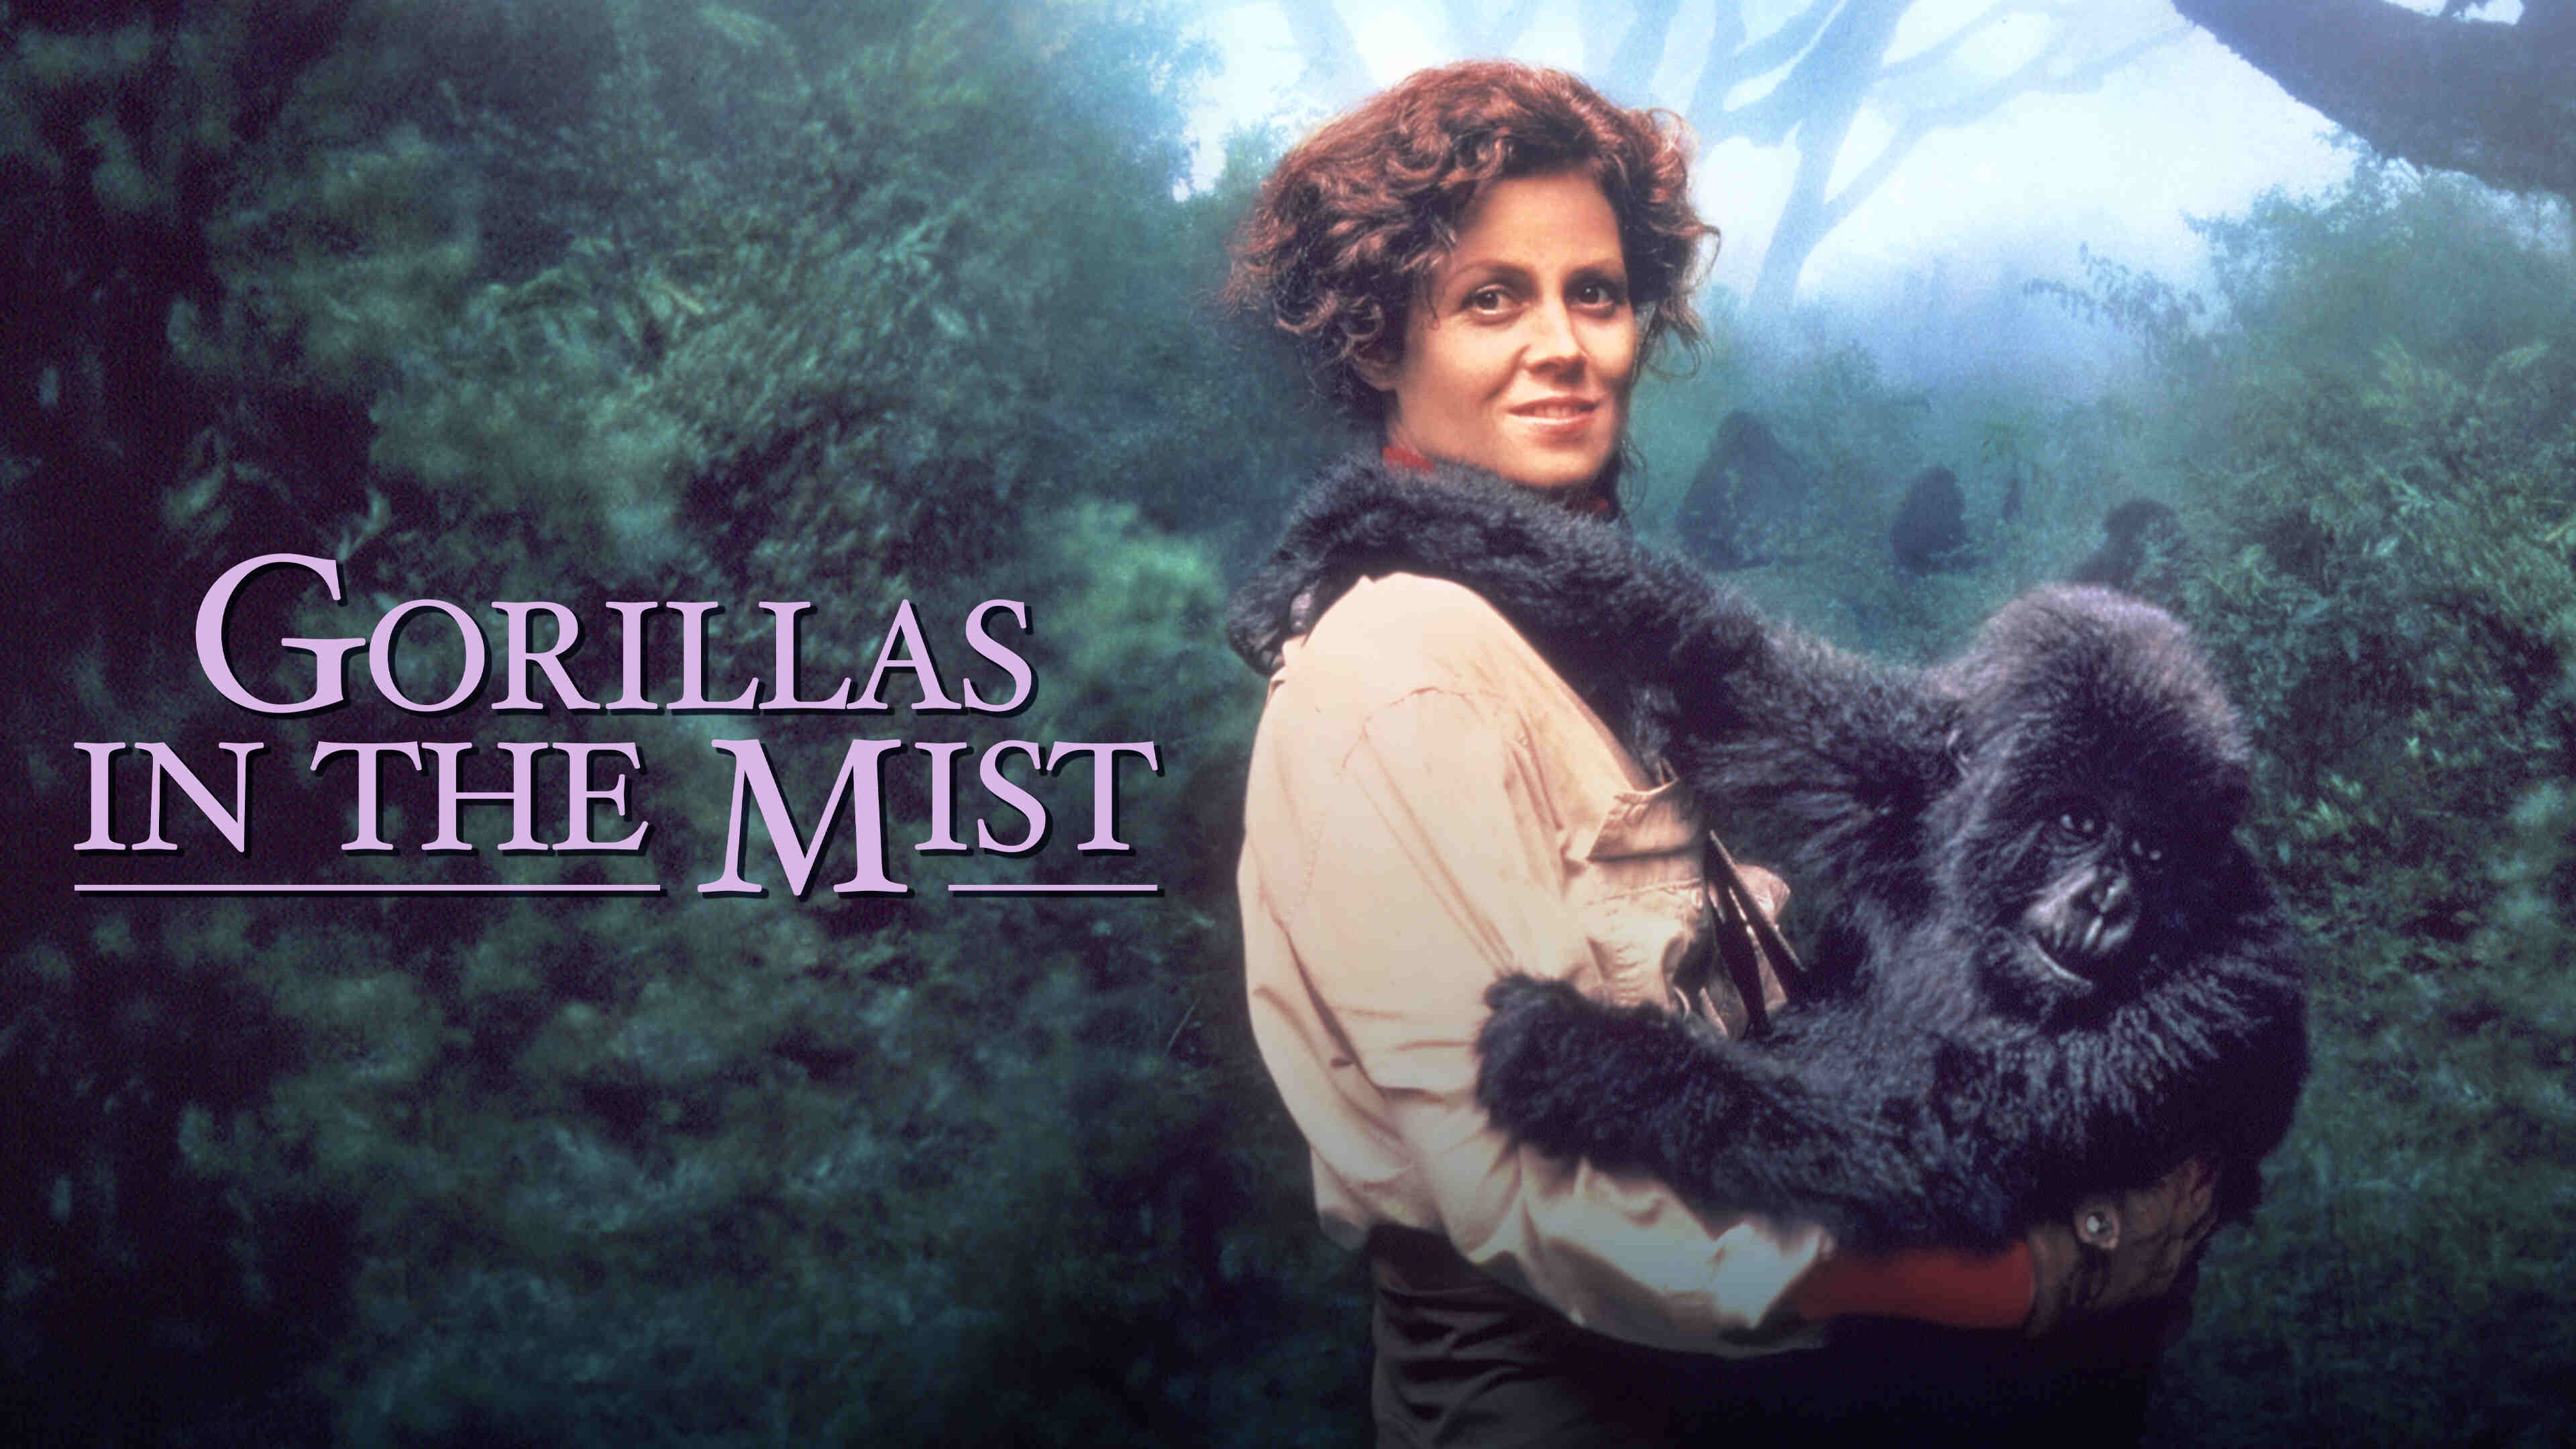 36-facts-about-the-movie-gorillas-in-the-mist